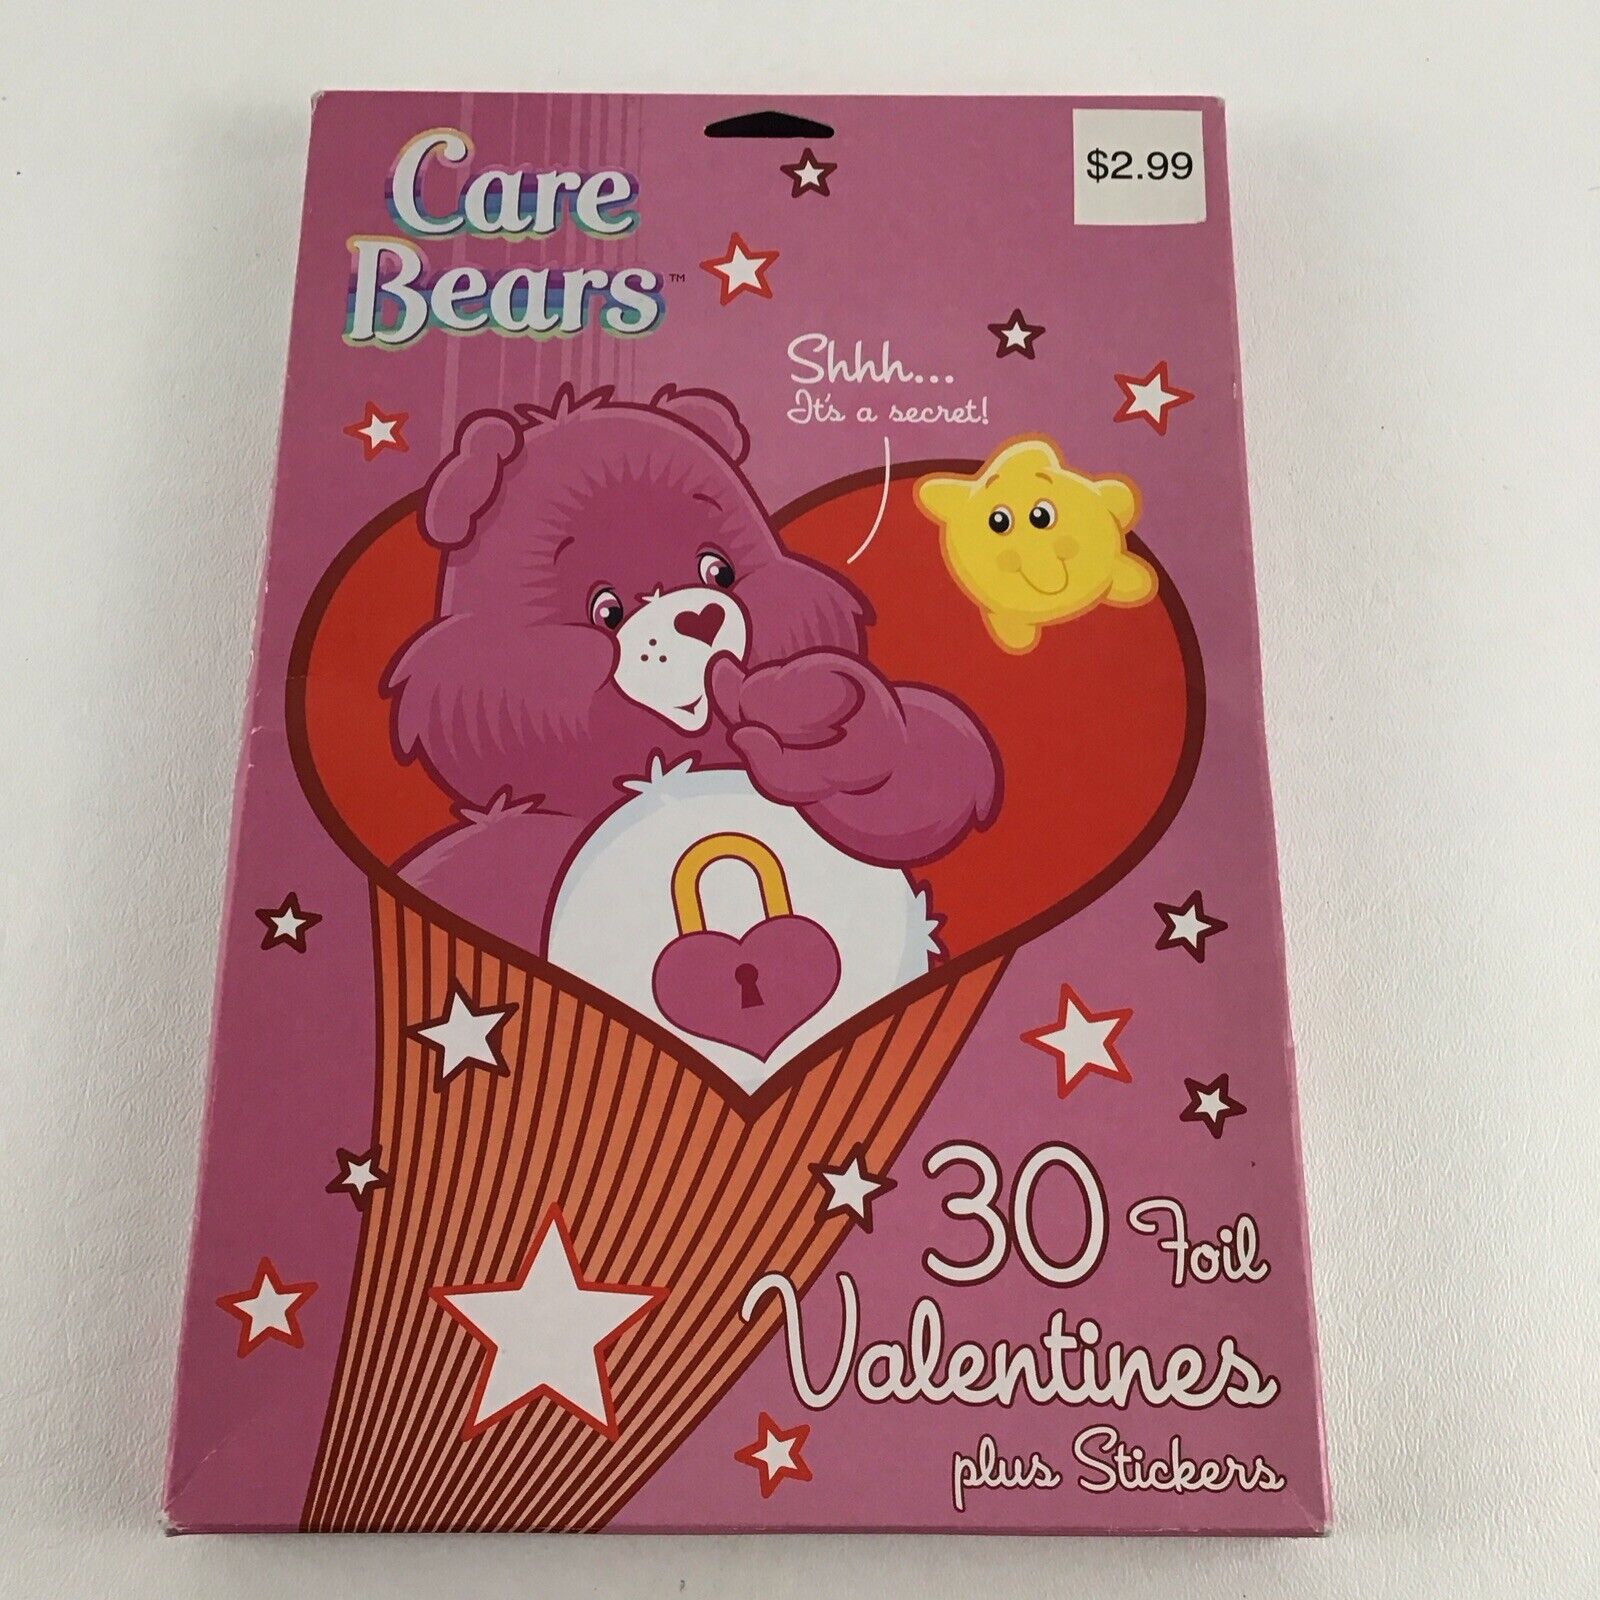 Care Bears Foil Valentine Cards Sticker Sheet Vintage American Greetings New